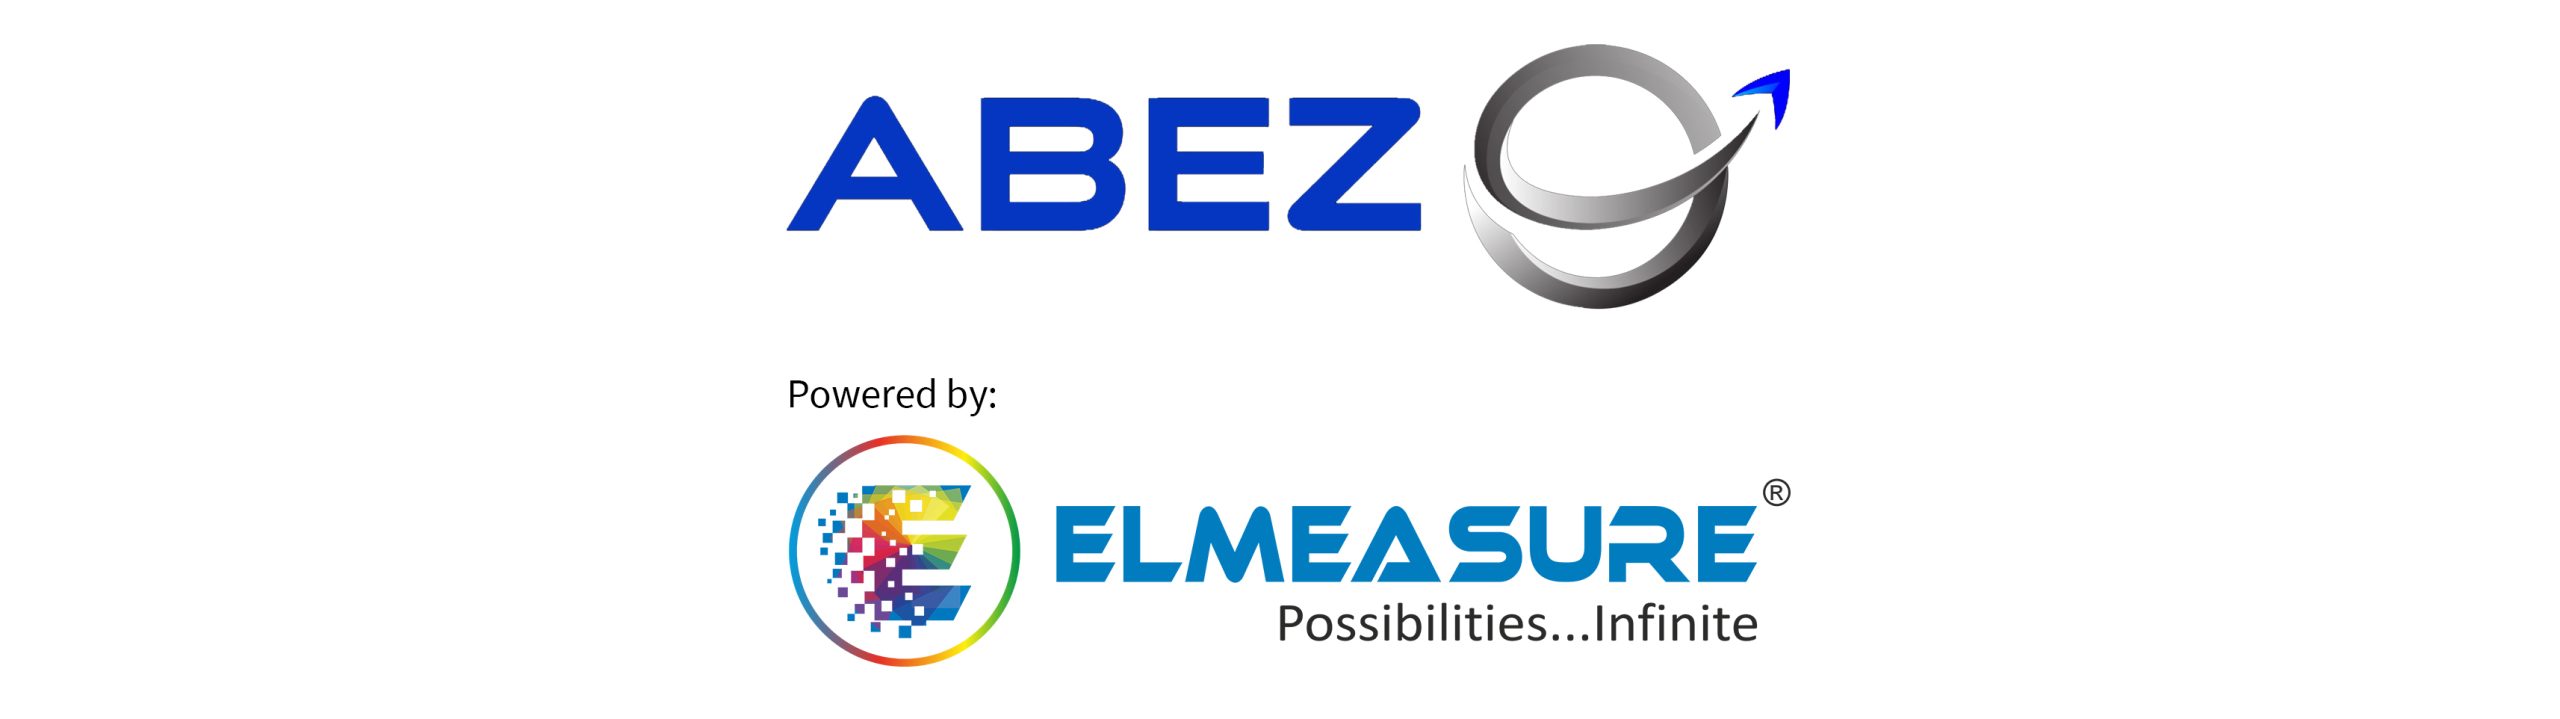 Abez- The leaders in Energy Management